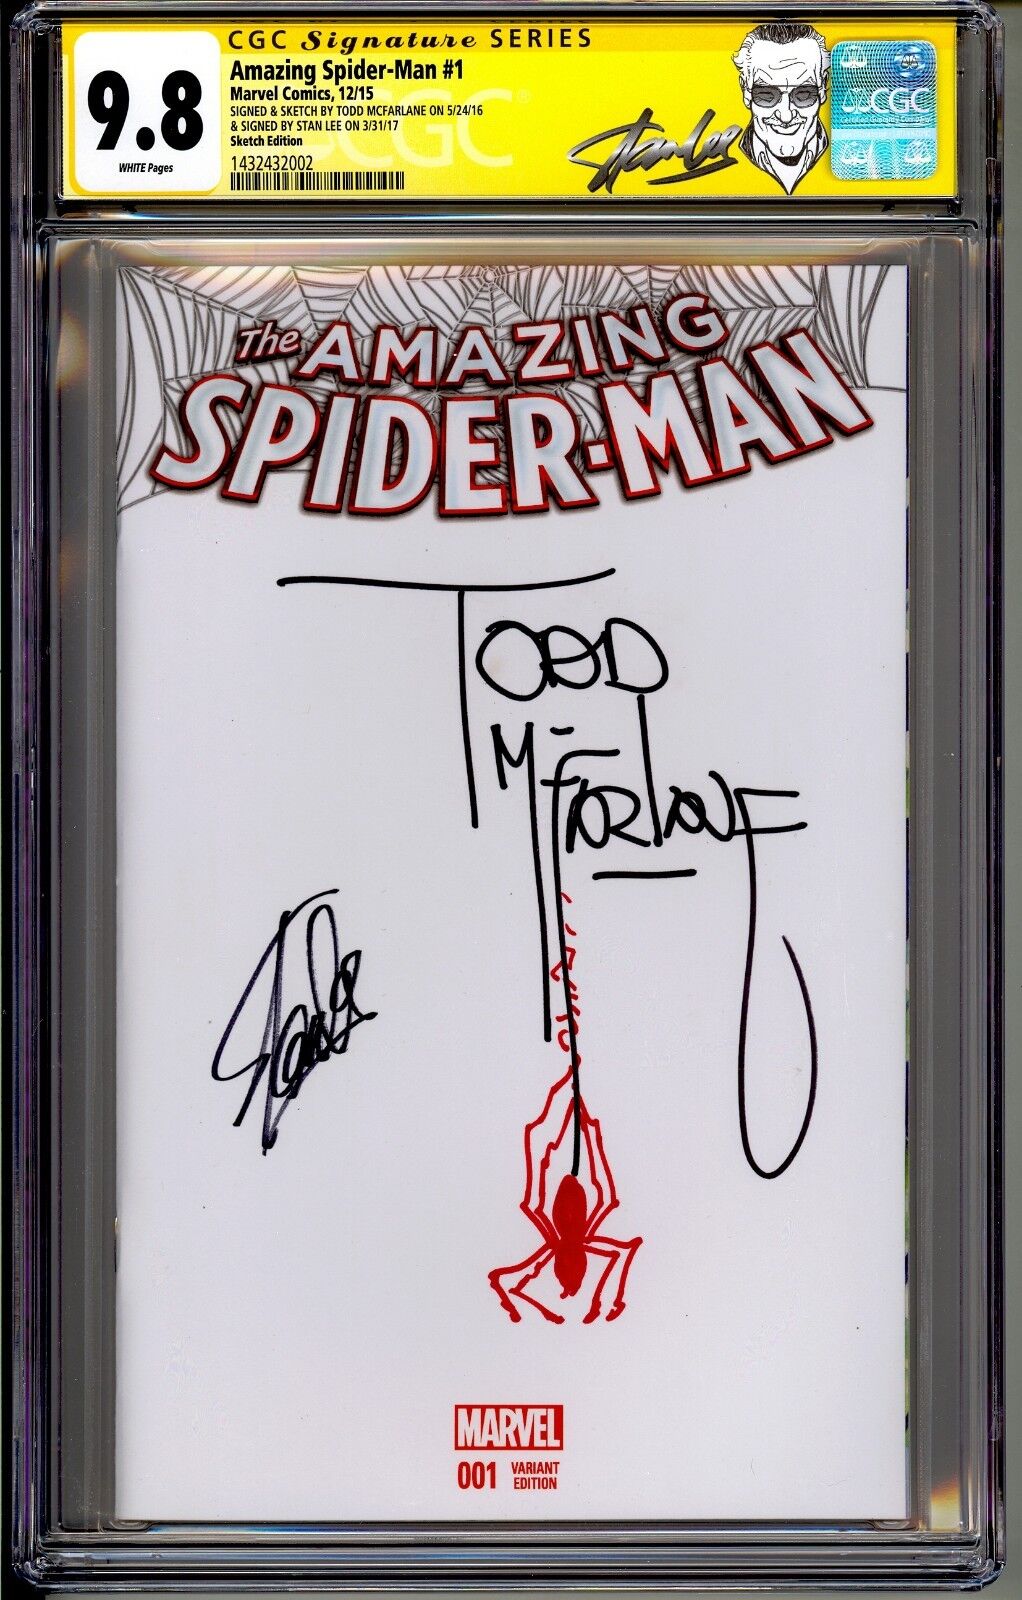 THE AMAZING SPIDER-MAN #1 CGC SS 9.8 STAN LEE SKETCH BY TODD MCFARLANE VARIANT